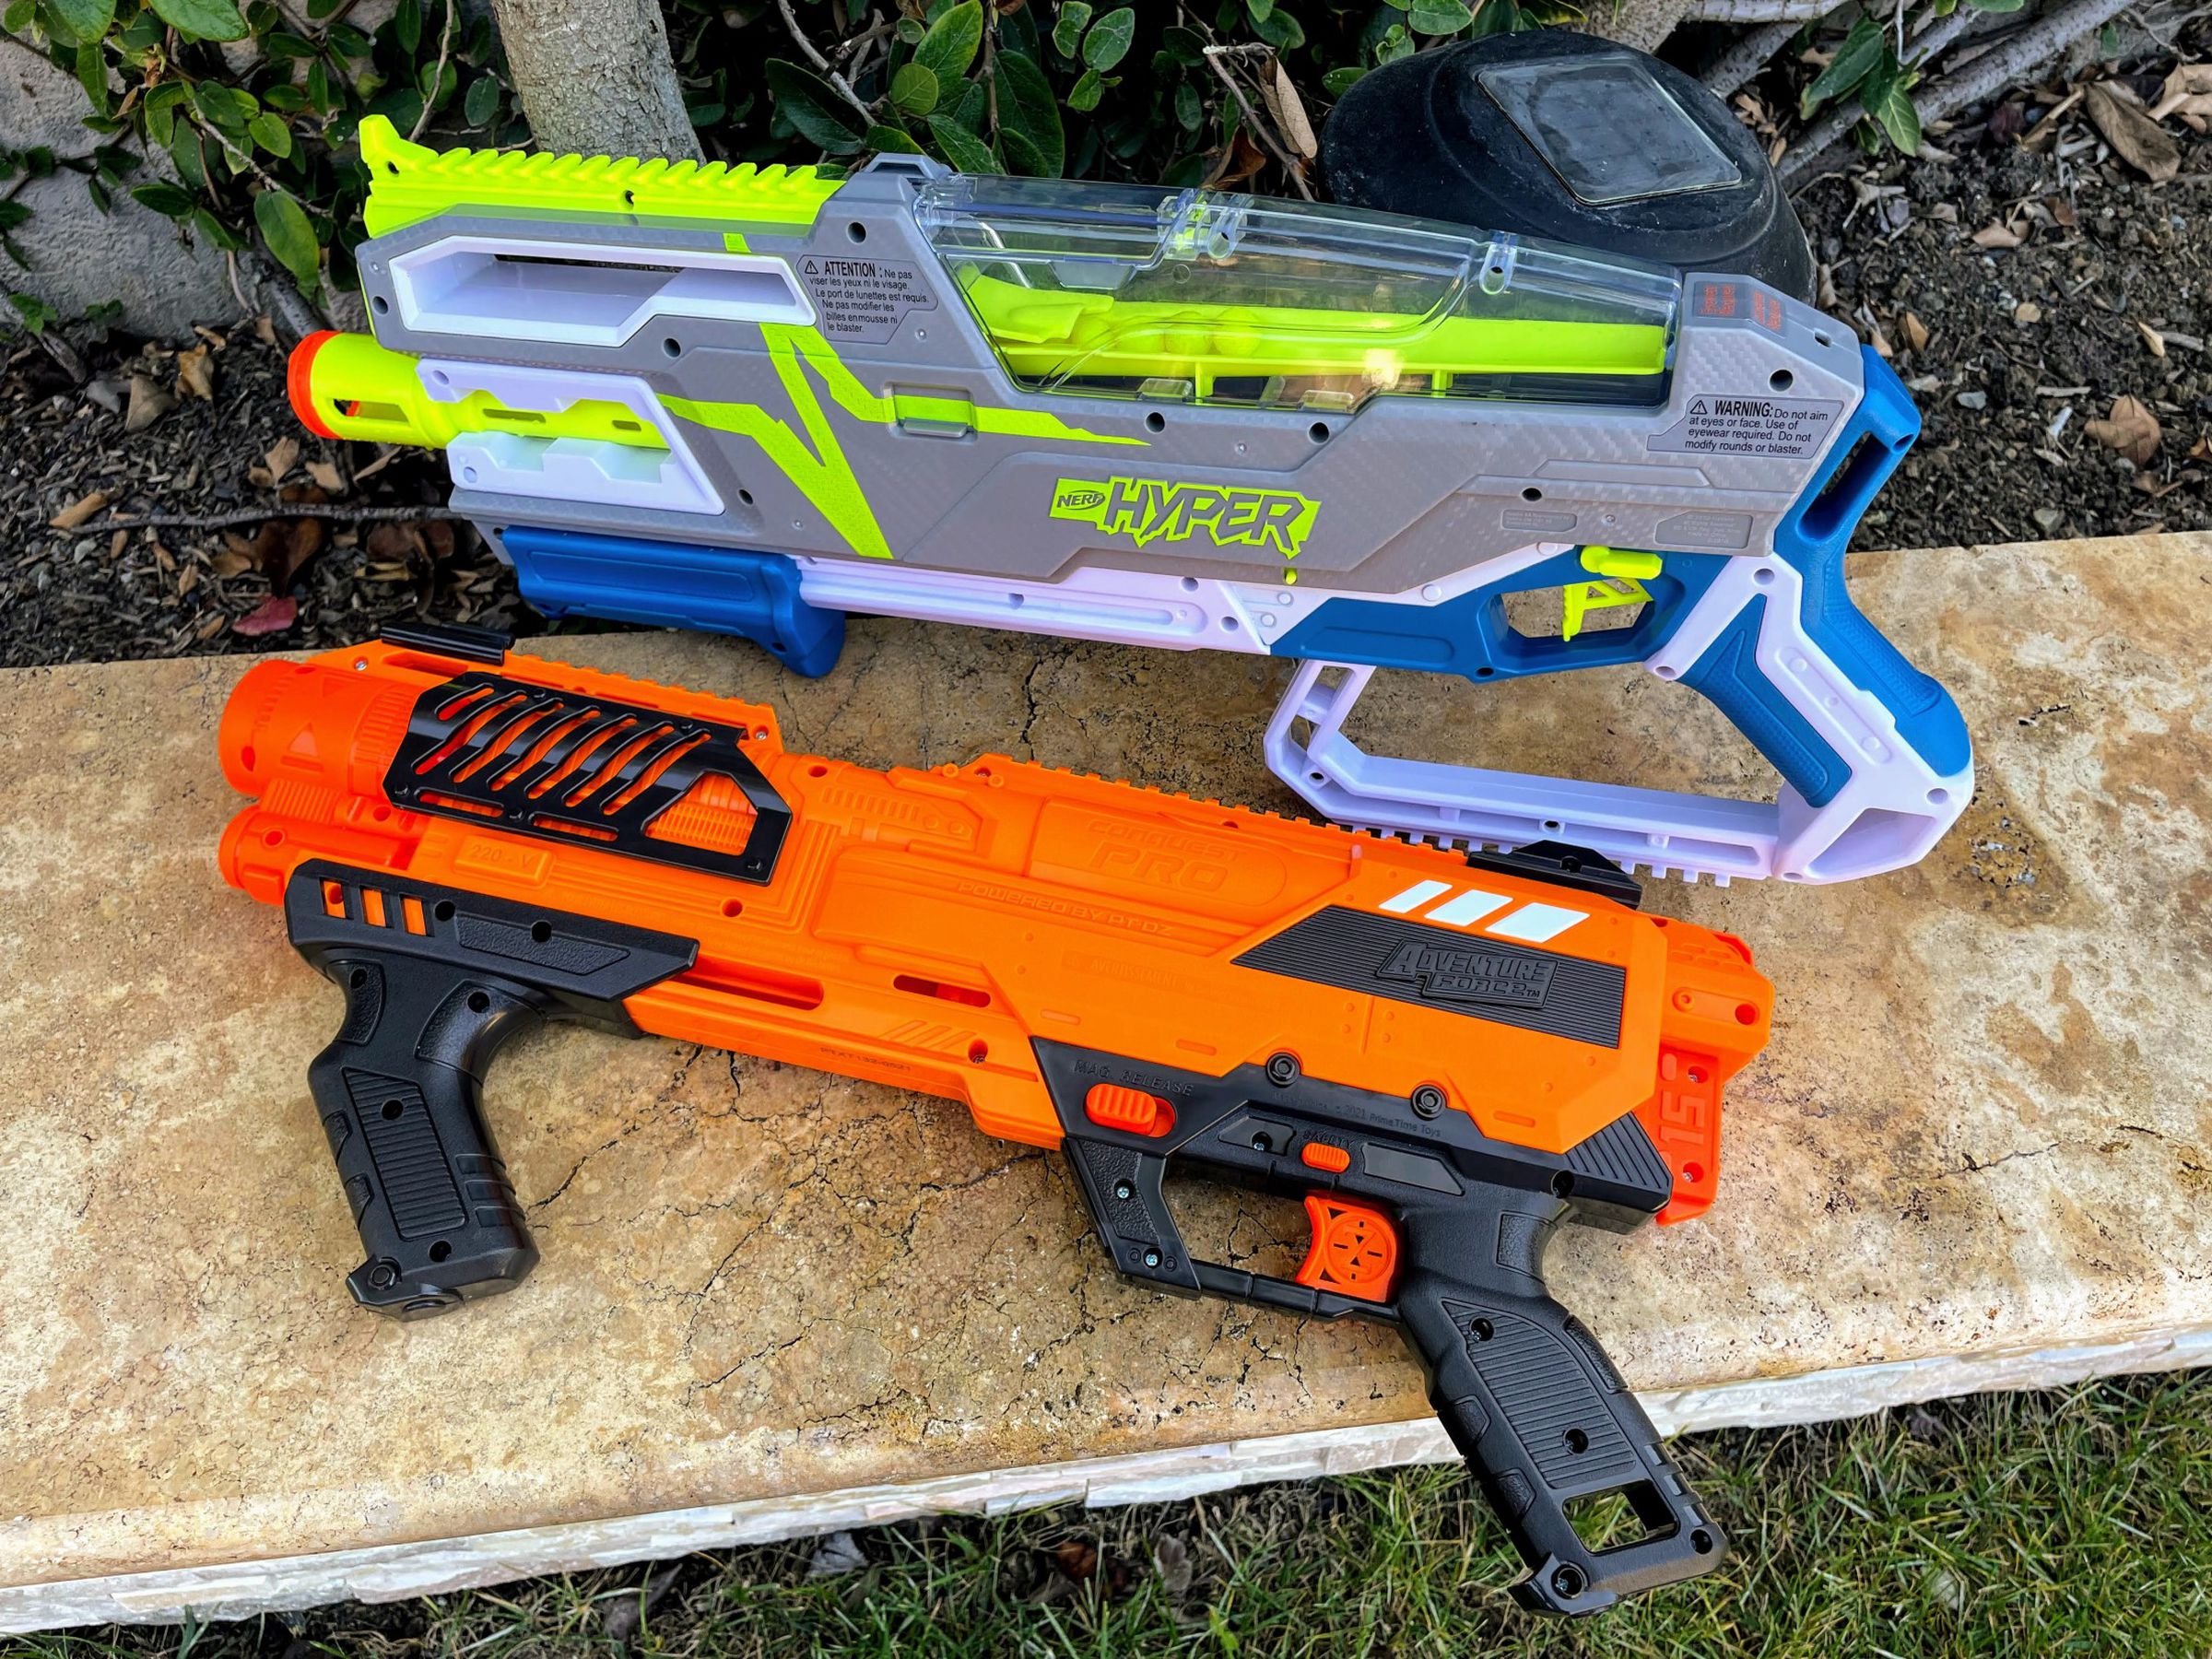 At $40, I’d buy a Dart Zone Conquest Pro over a Nerf Hyper Siege-50 any day of the week.